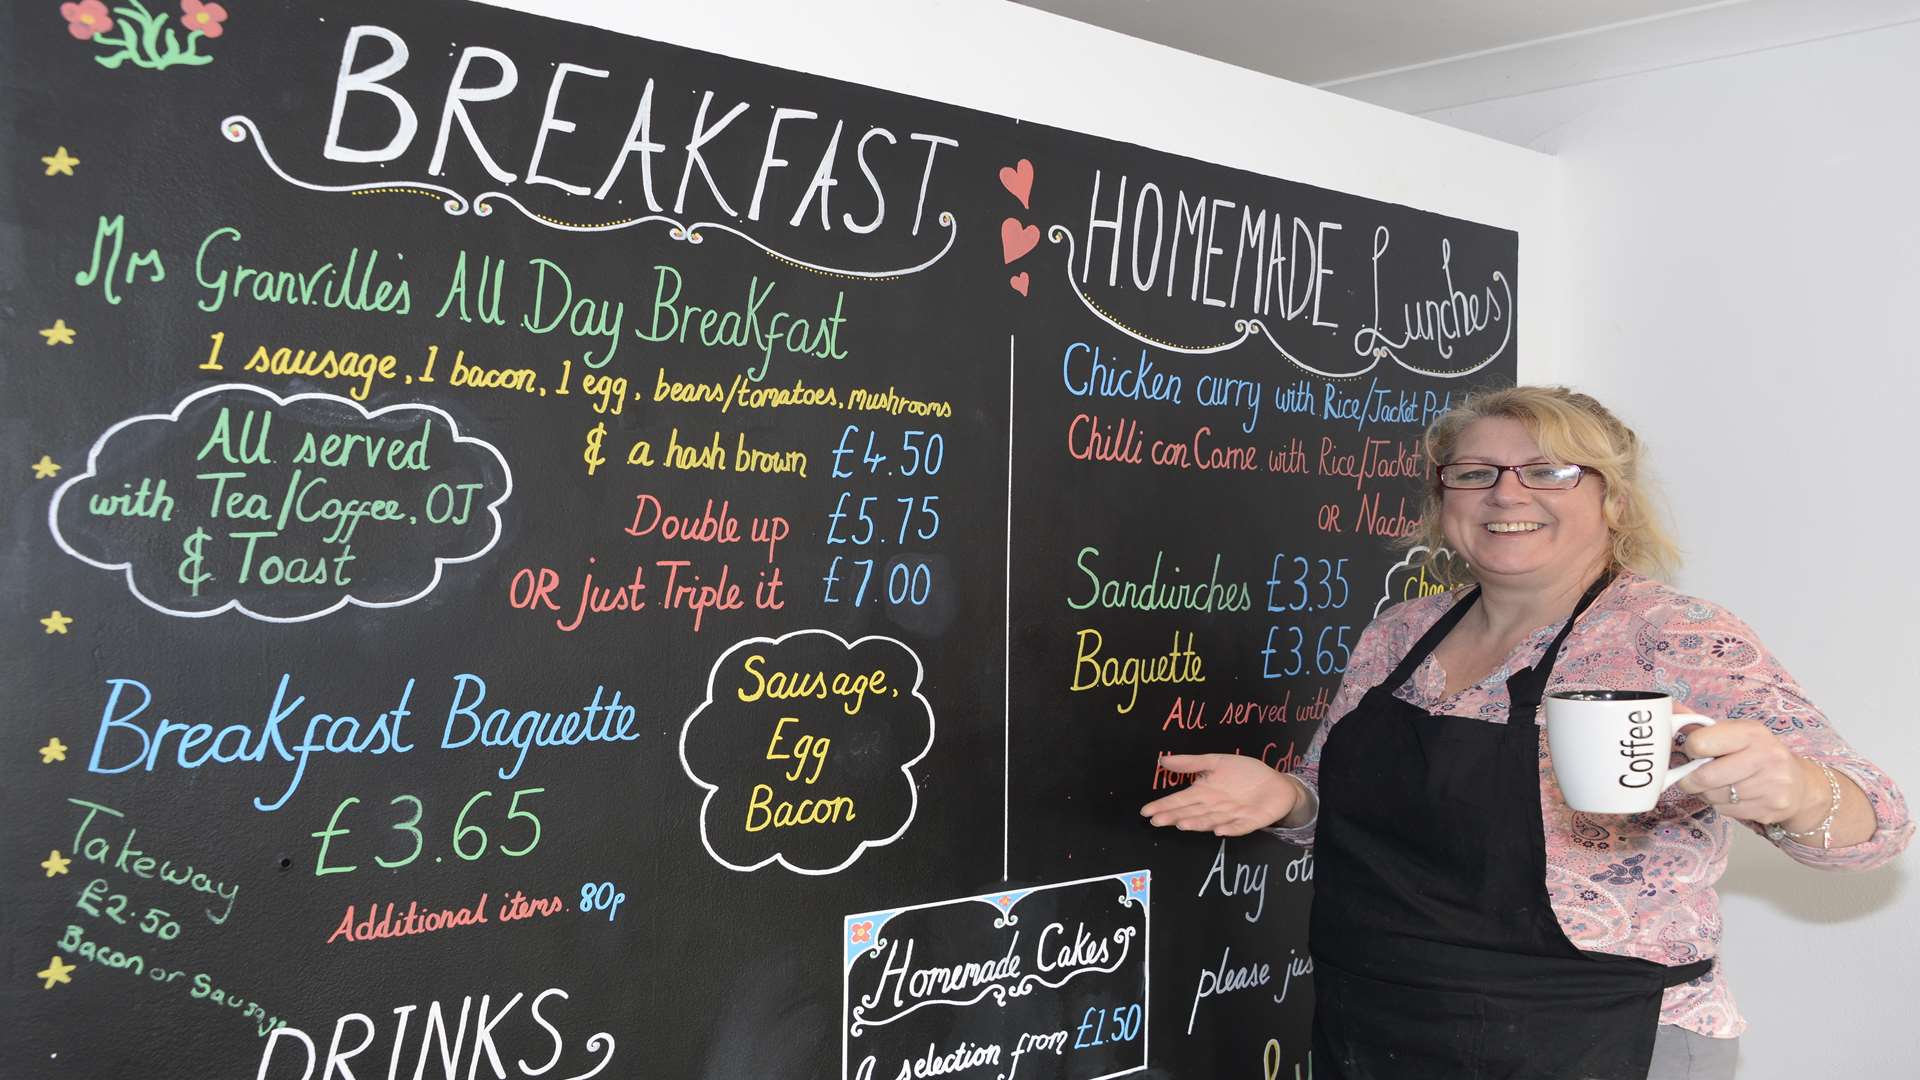 Ruth Clist is offering breakfast and lunches